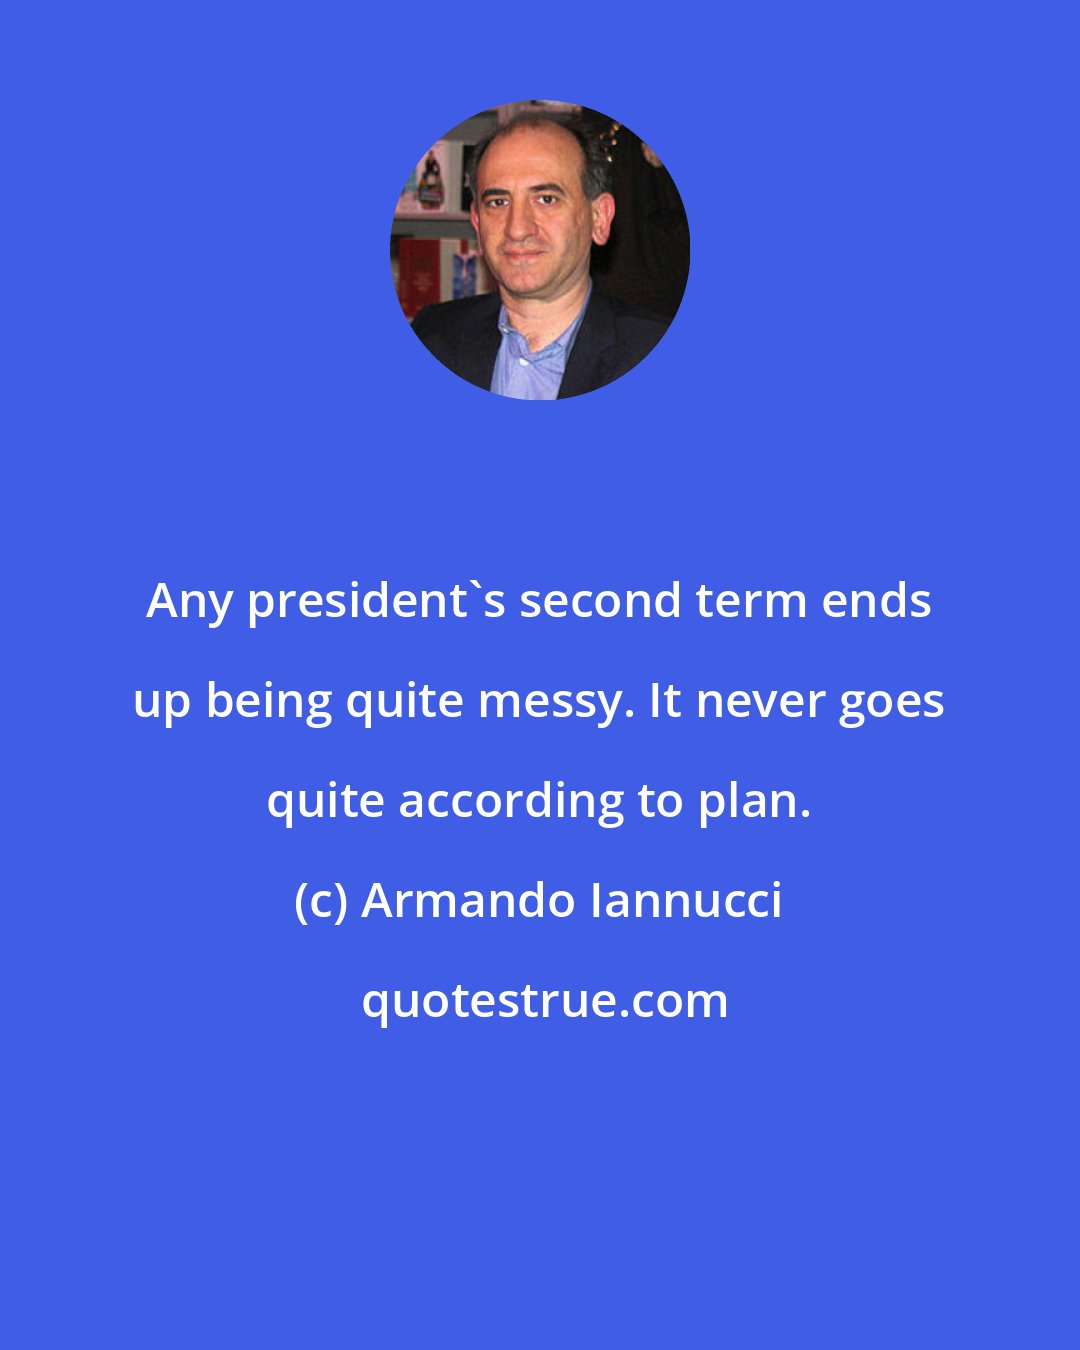 Armando Iannucci: Any president's second term ends up being quite messy. It never goes quite according to plan.